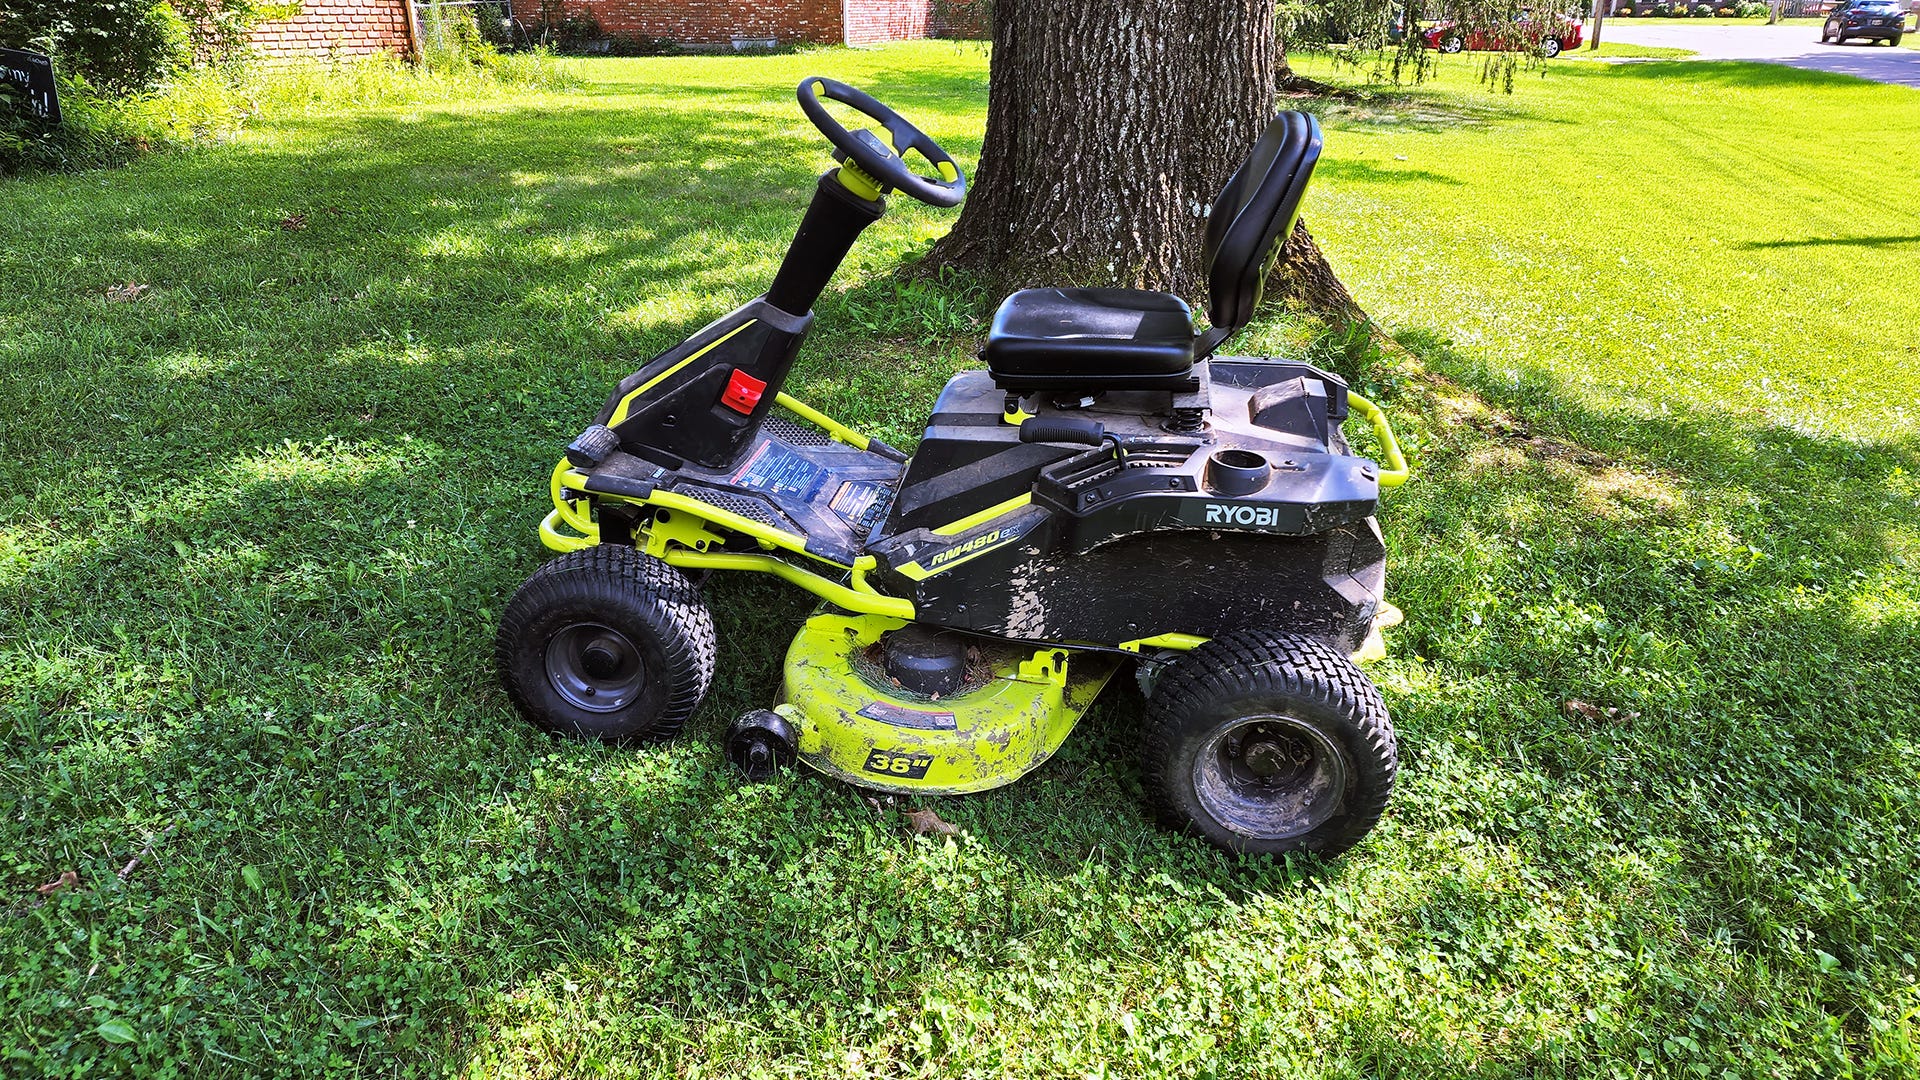 A Ryobi electric lawn mower seen from the side